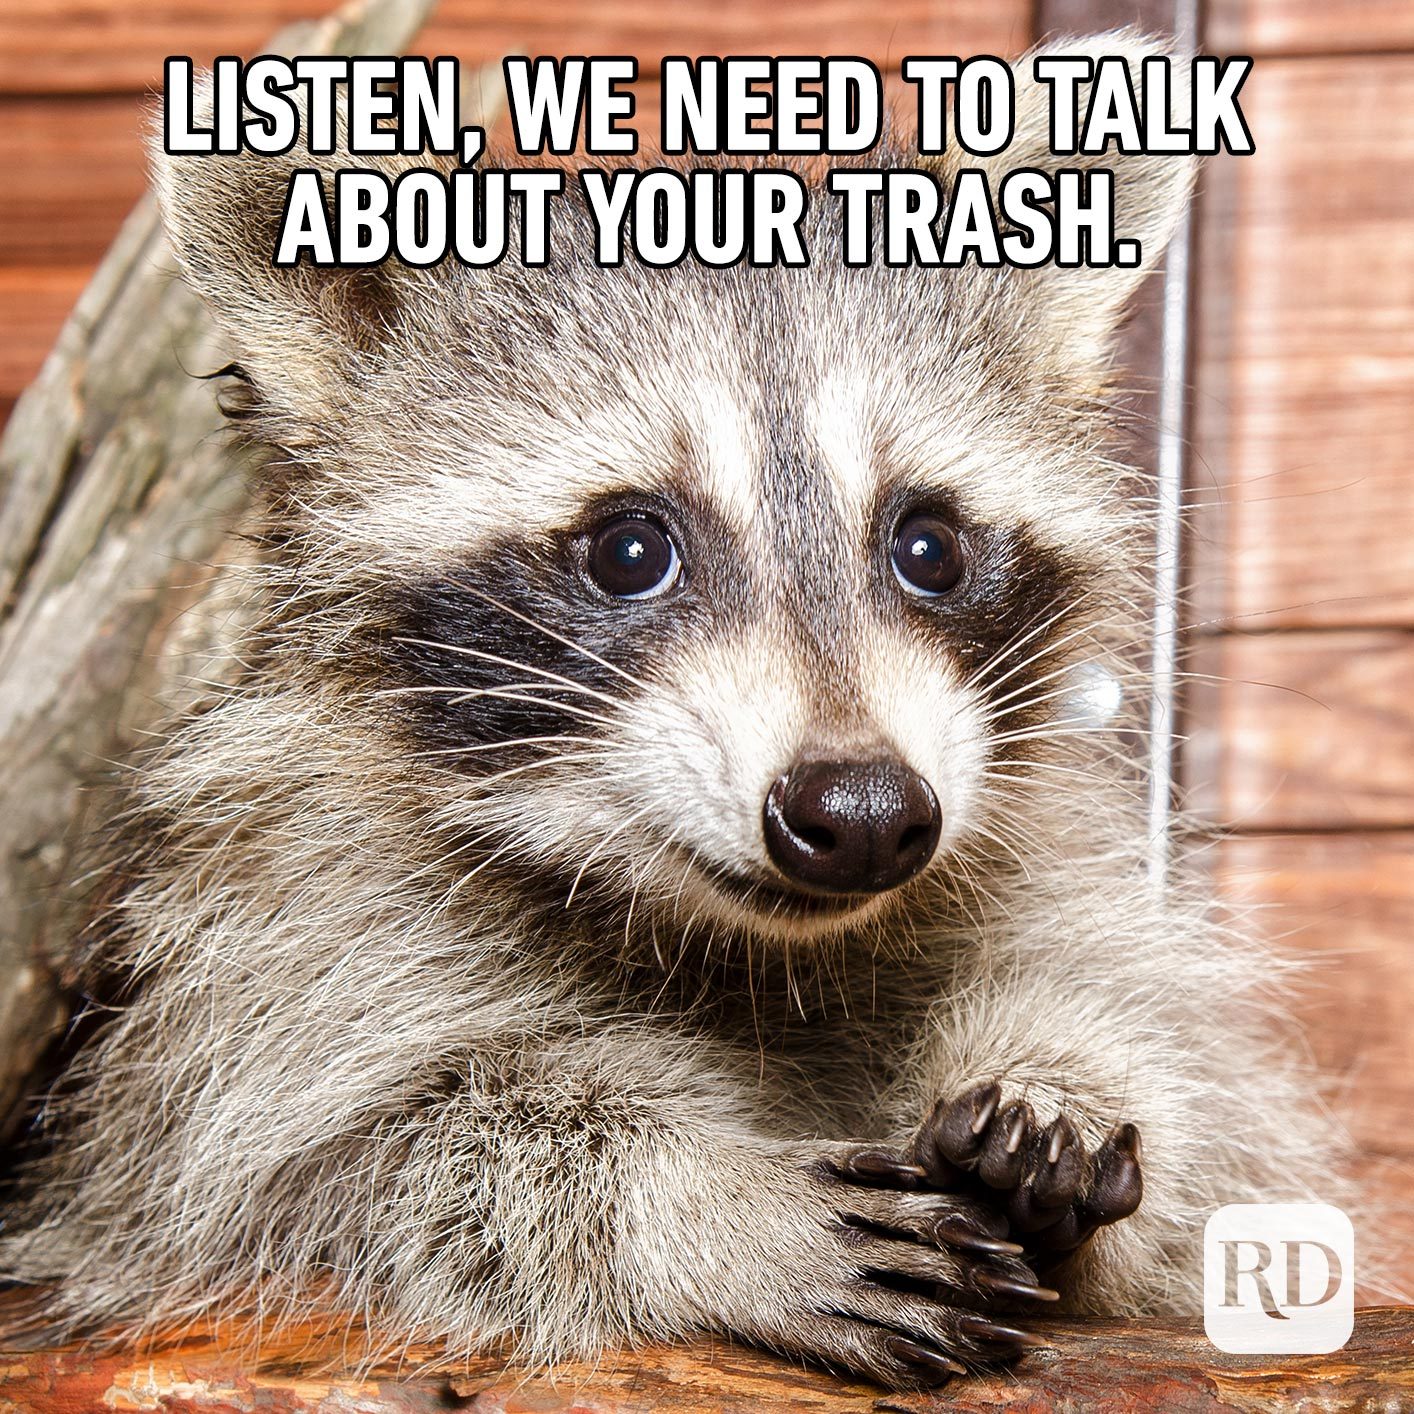 Racoon. Meme text: Listen, we need to talk about your trash.